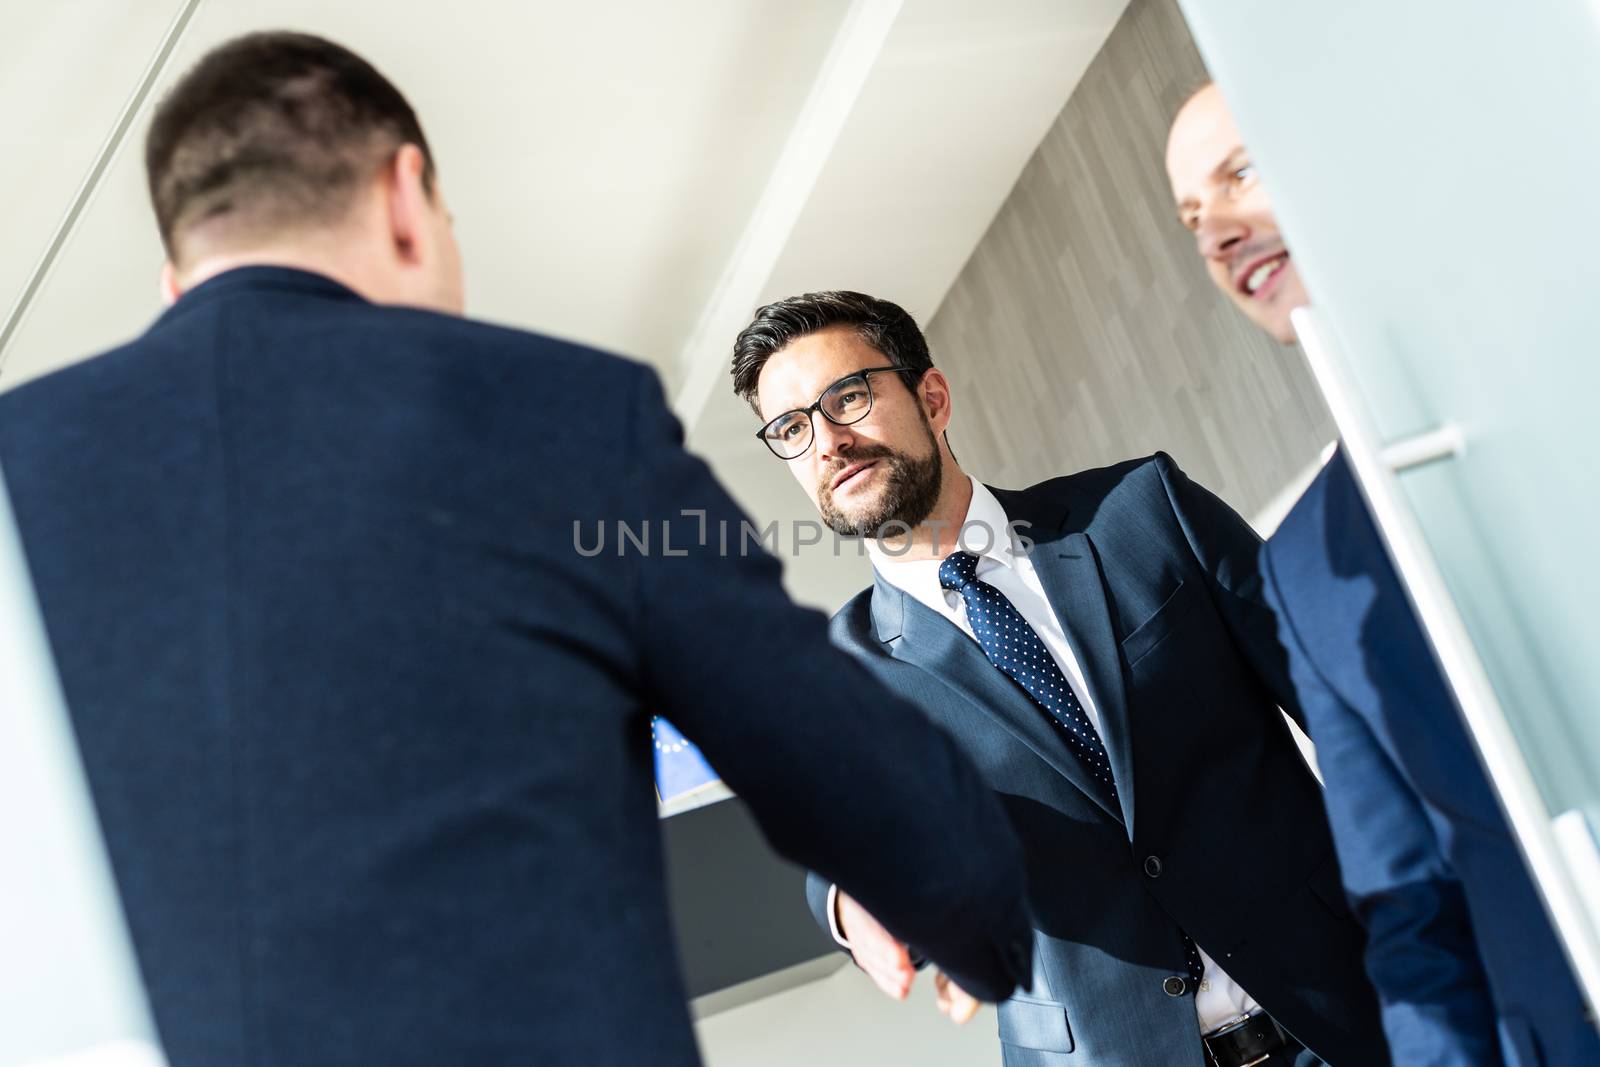 Group of confident business people greeting with a handshake at business meeting in modern office or closing the deal agreement by shaking hands. by kasto